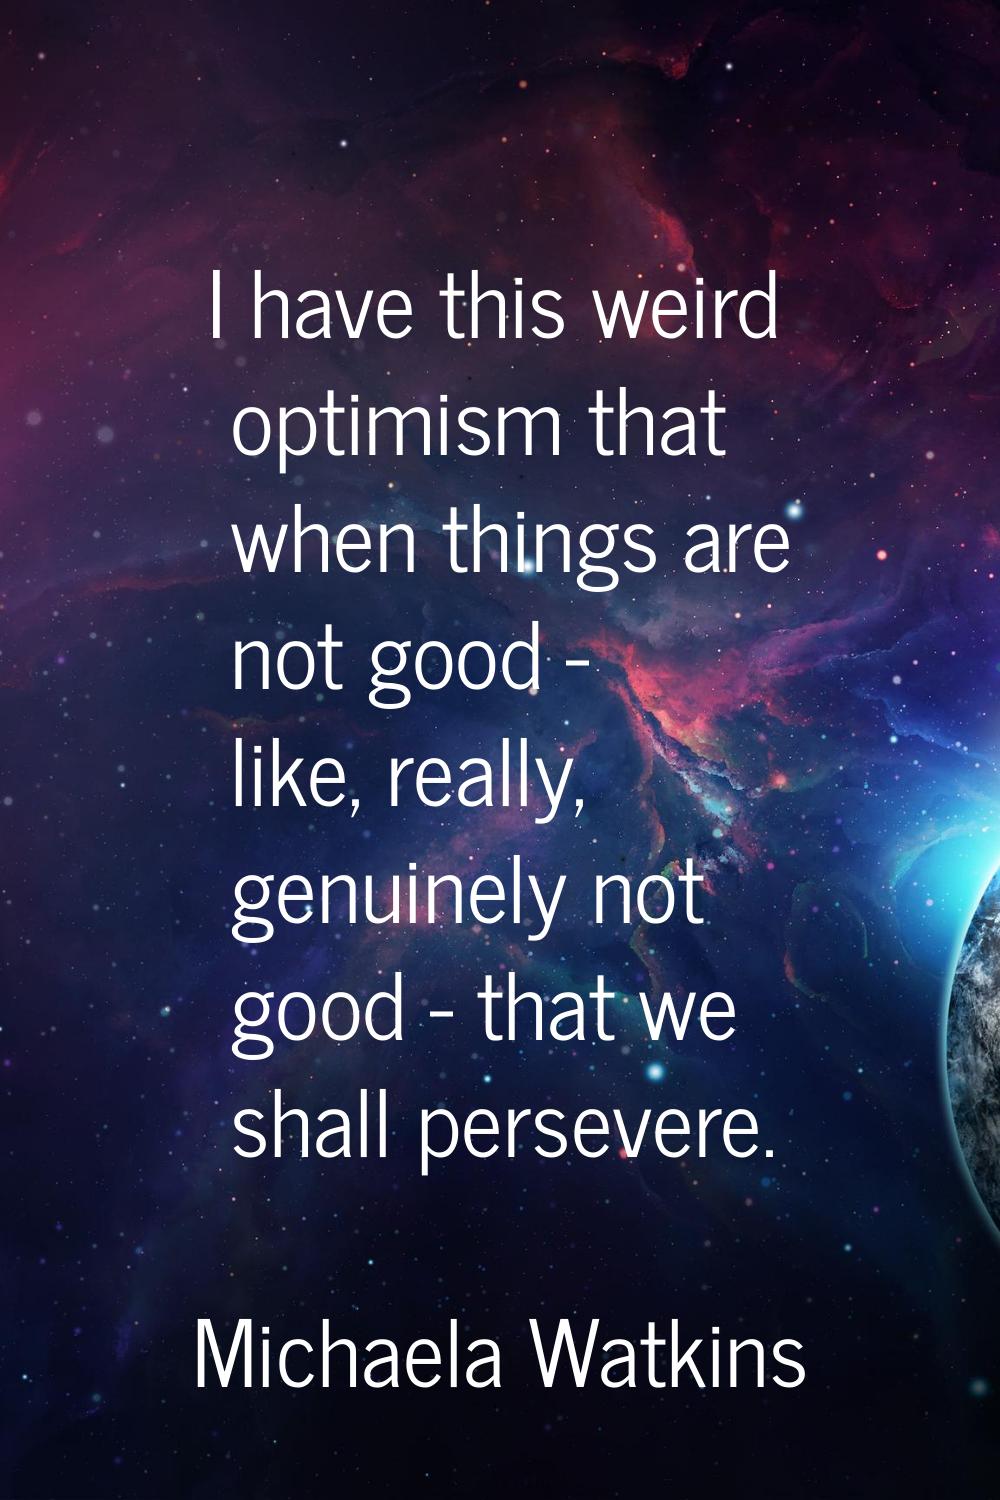 I have this weird optimism that when things are not good - like, really, genuinely not good - that 